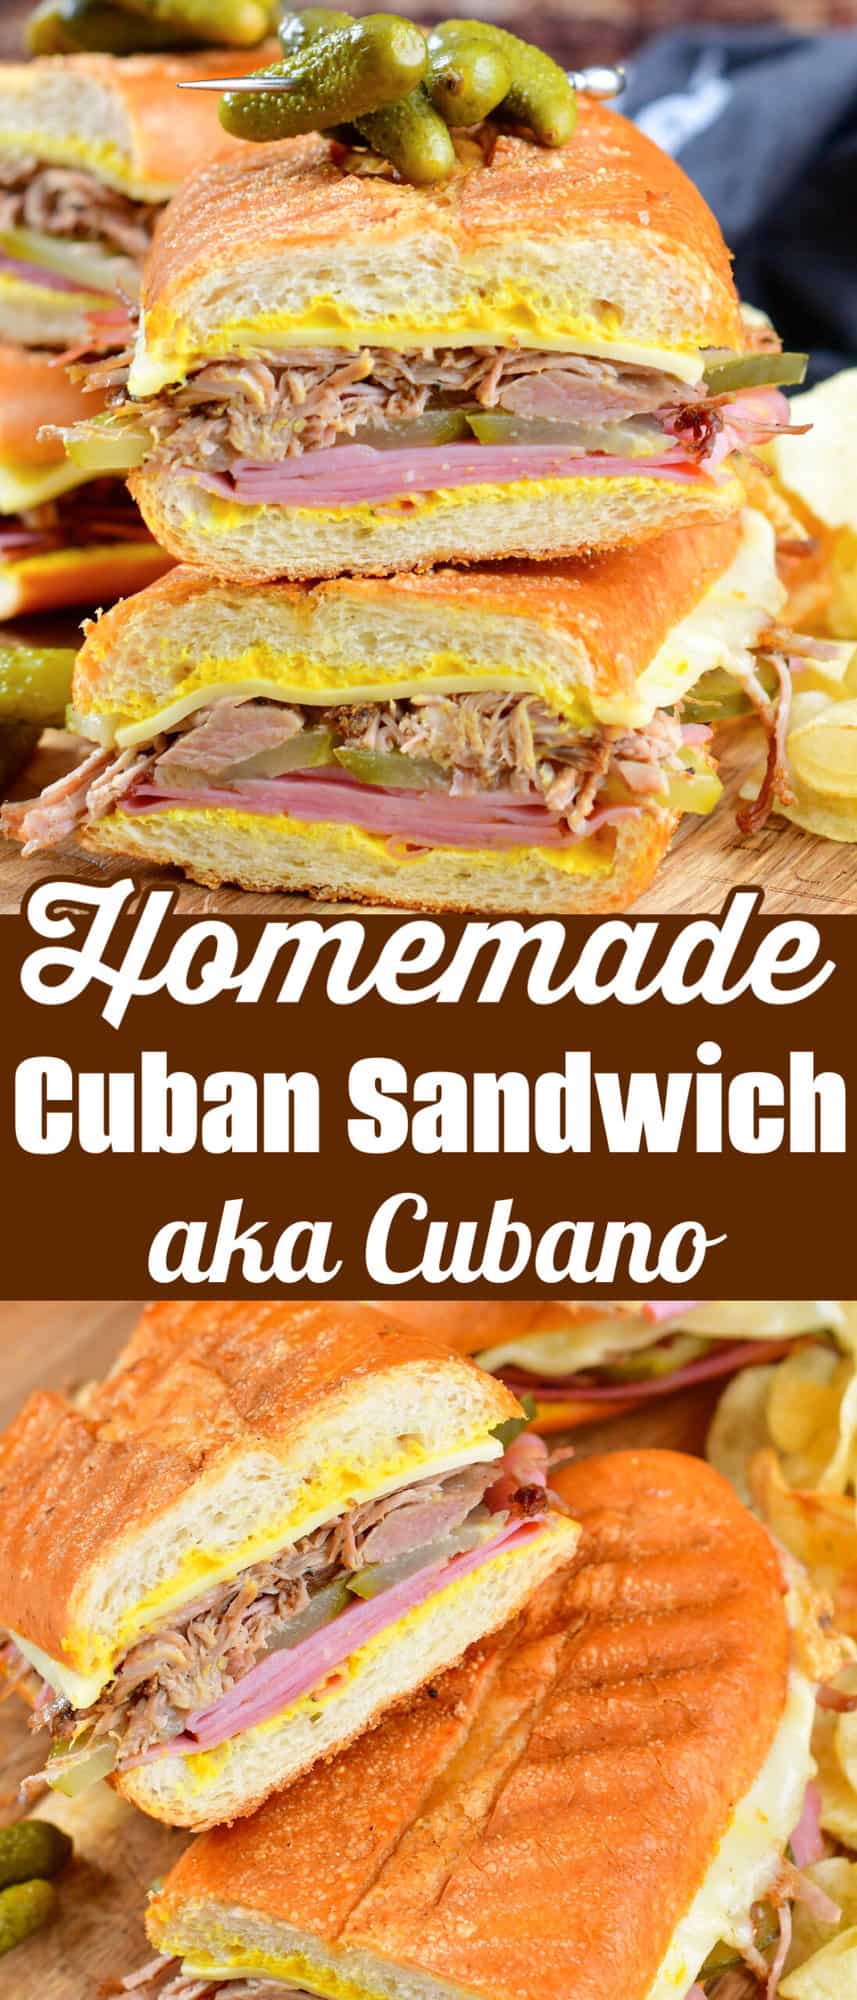 collage of two images of the Cuban sandwich stacked with title